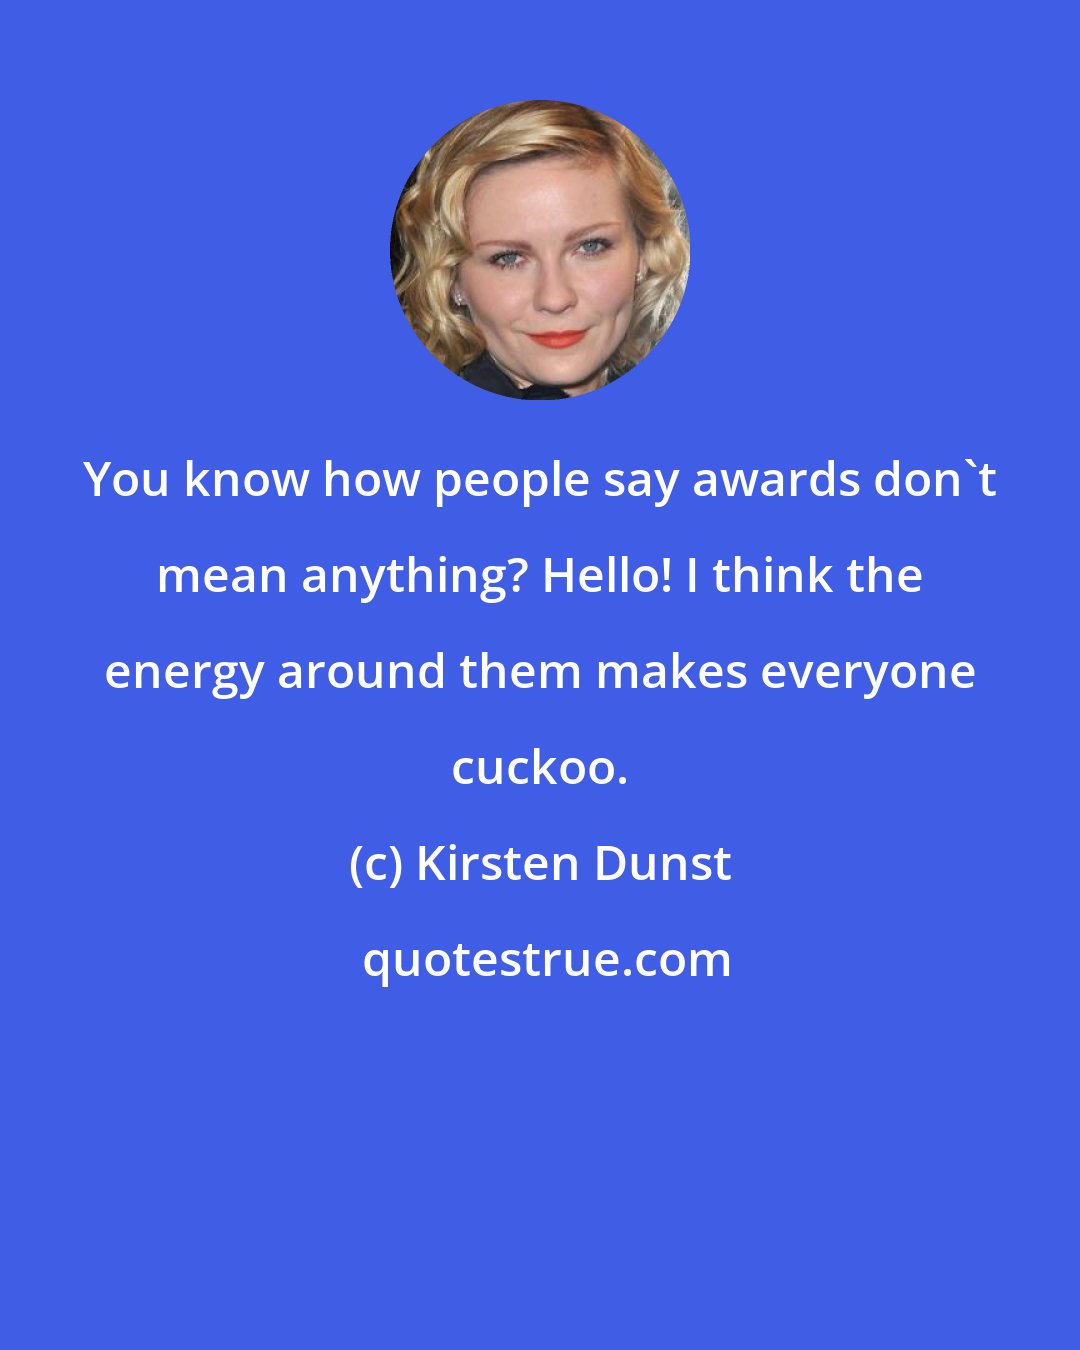 Kirsten Dunst: You know how people say awards don't mean anything? Hello! I think the energy around them makes everyone cuckoo.